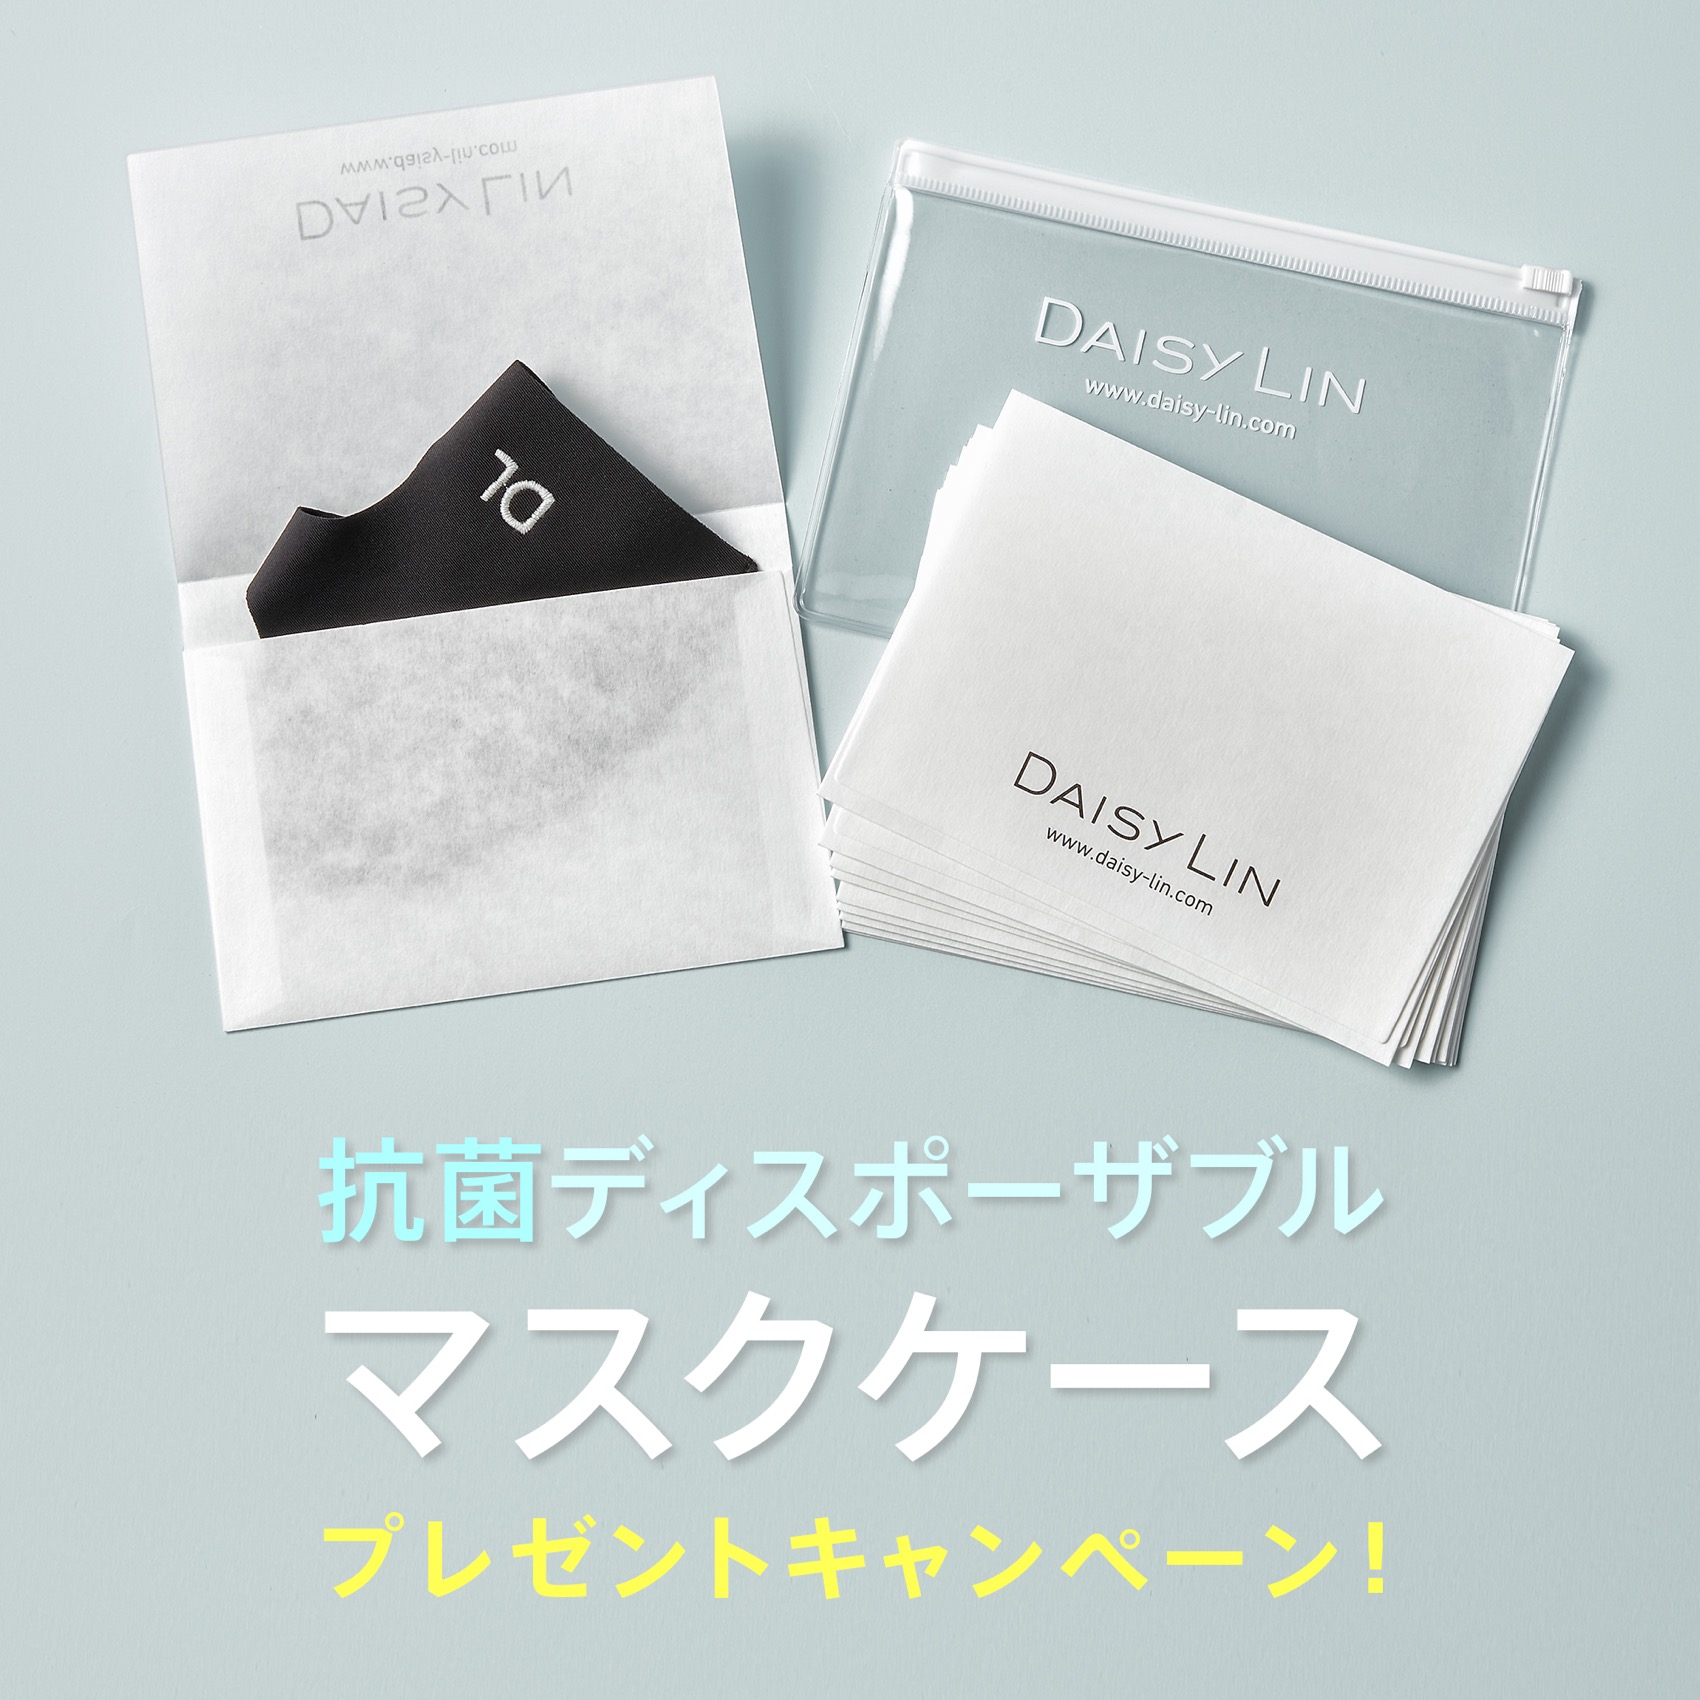 Daisy Lin Official Website And Online Boutique 抗菌ディスポーザブルマスクケース プレゼント キャンペーン